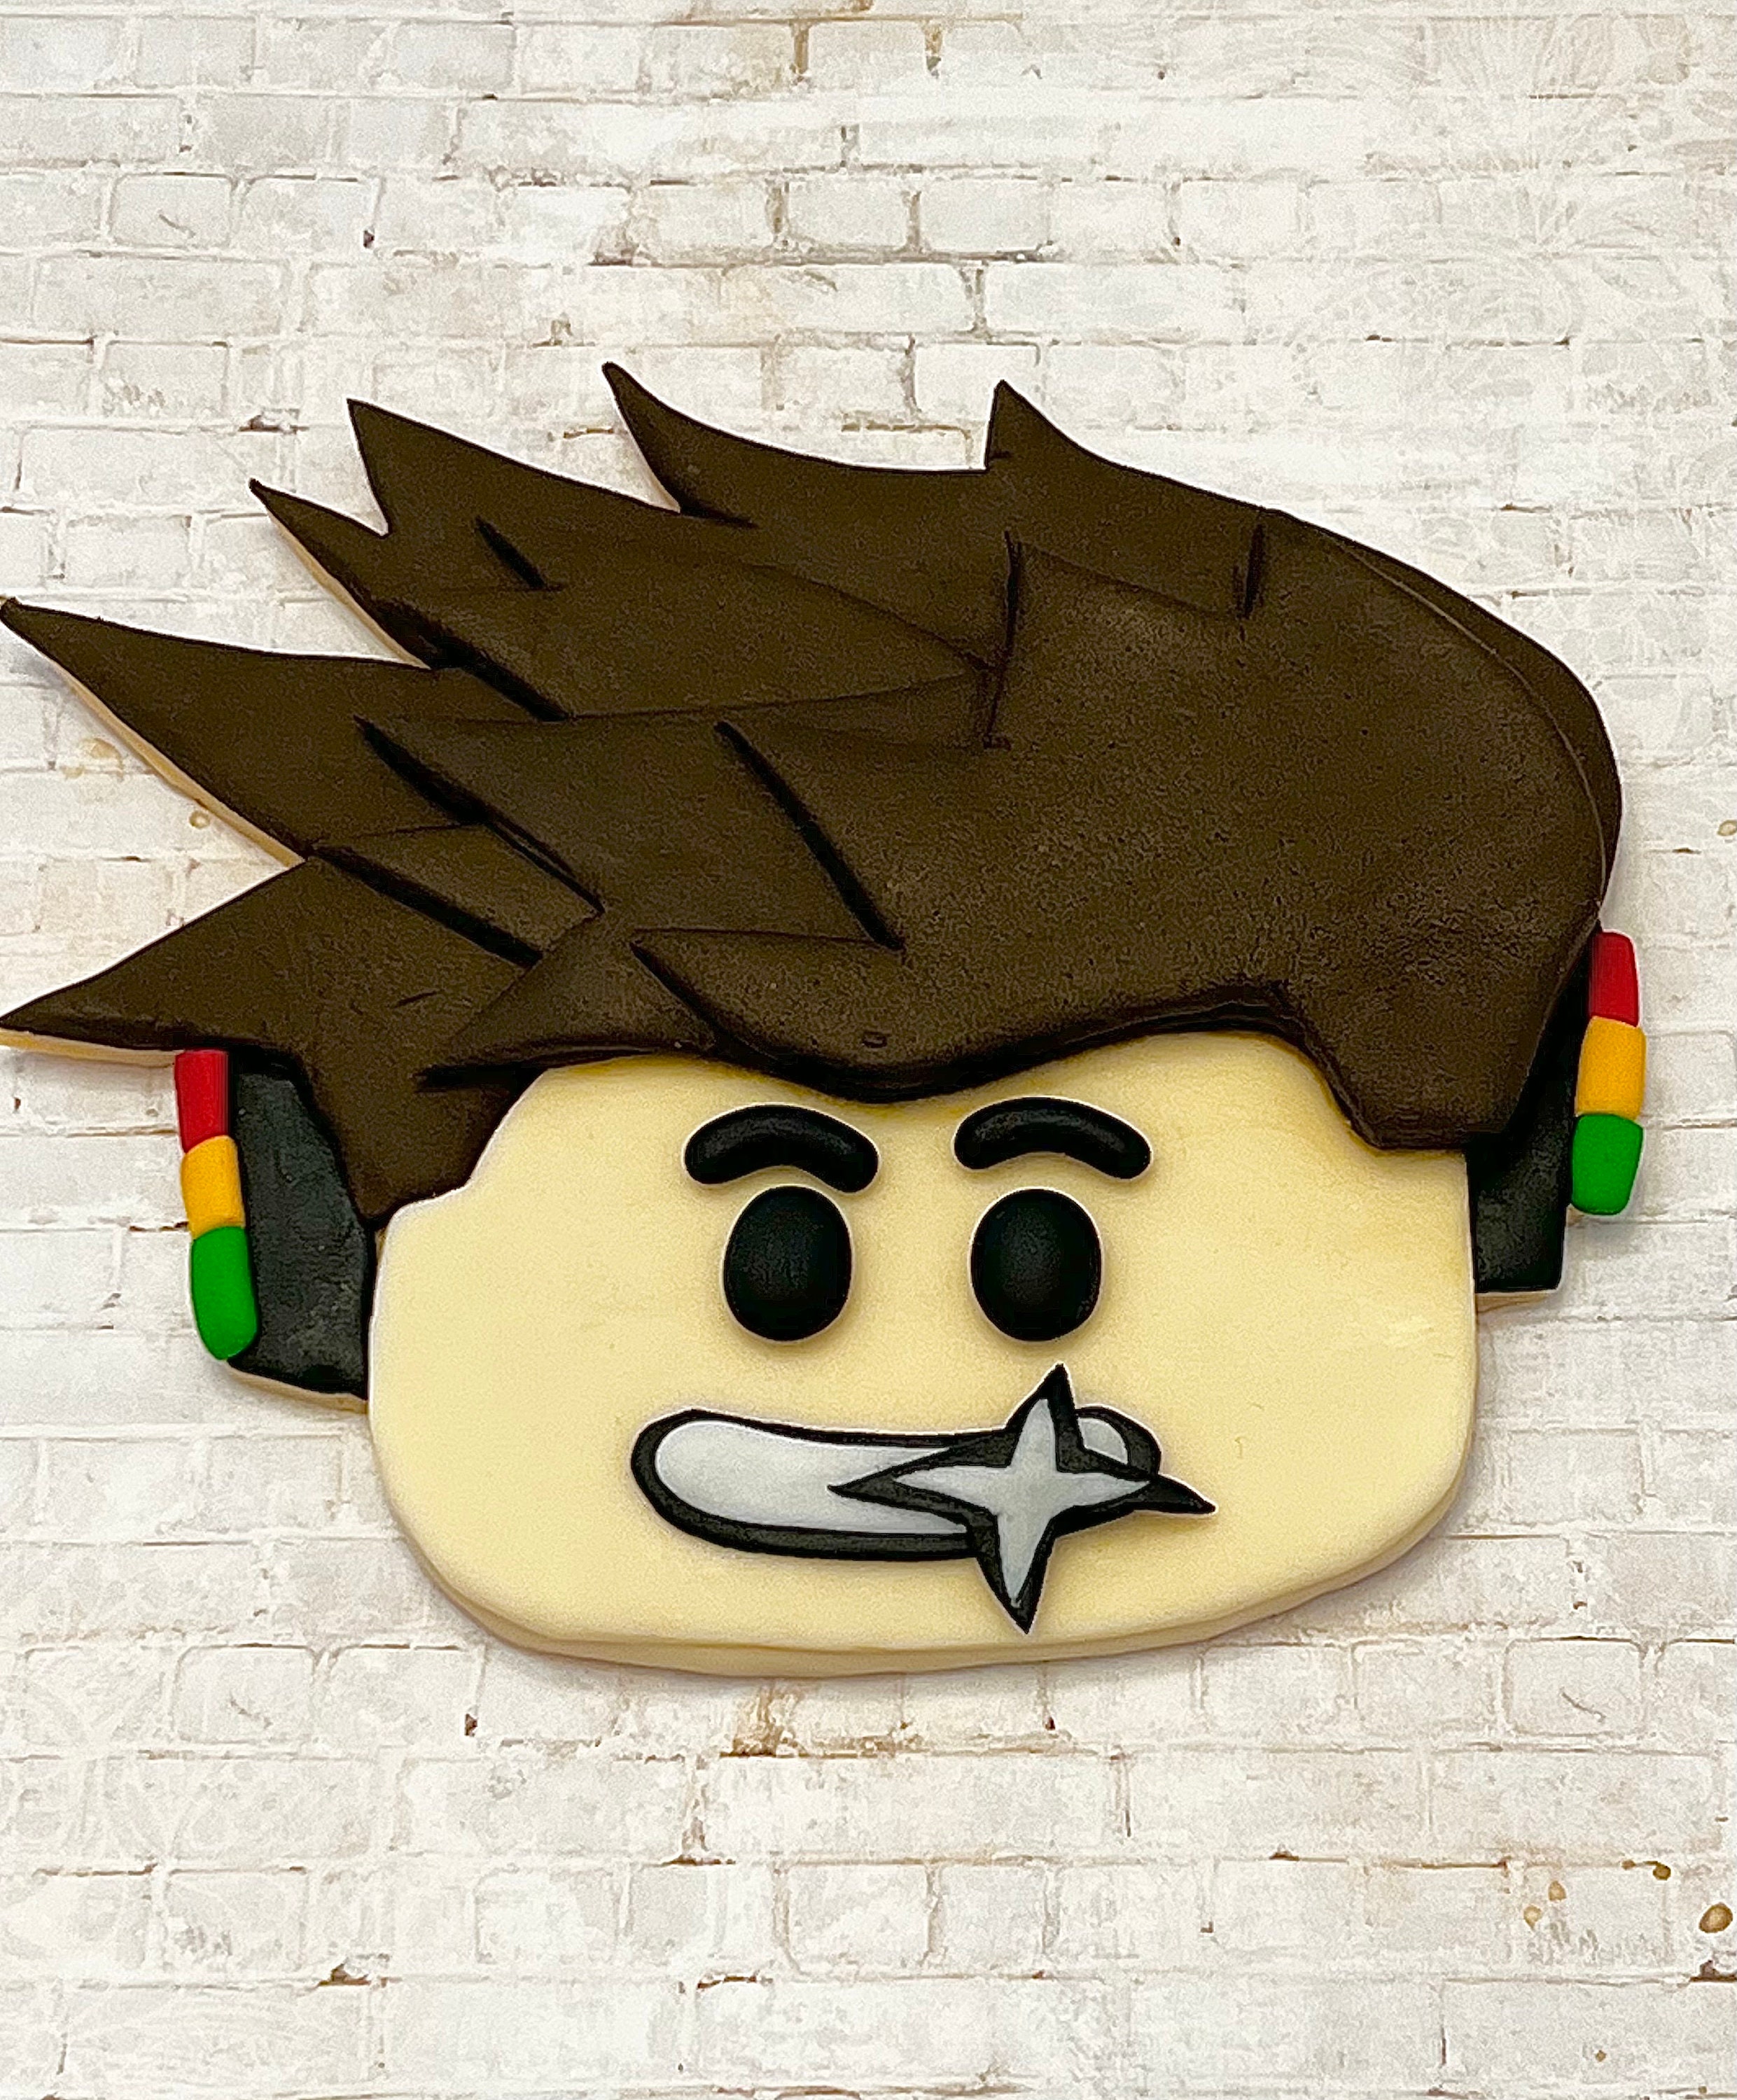 Legends of Roblox Soldier Skin Edible Cake Topper Image ABPID15155